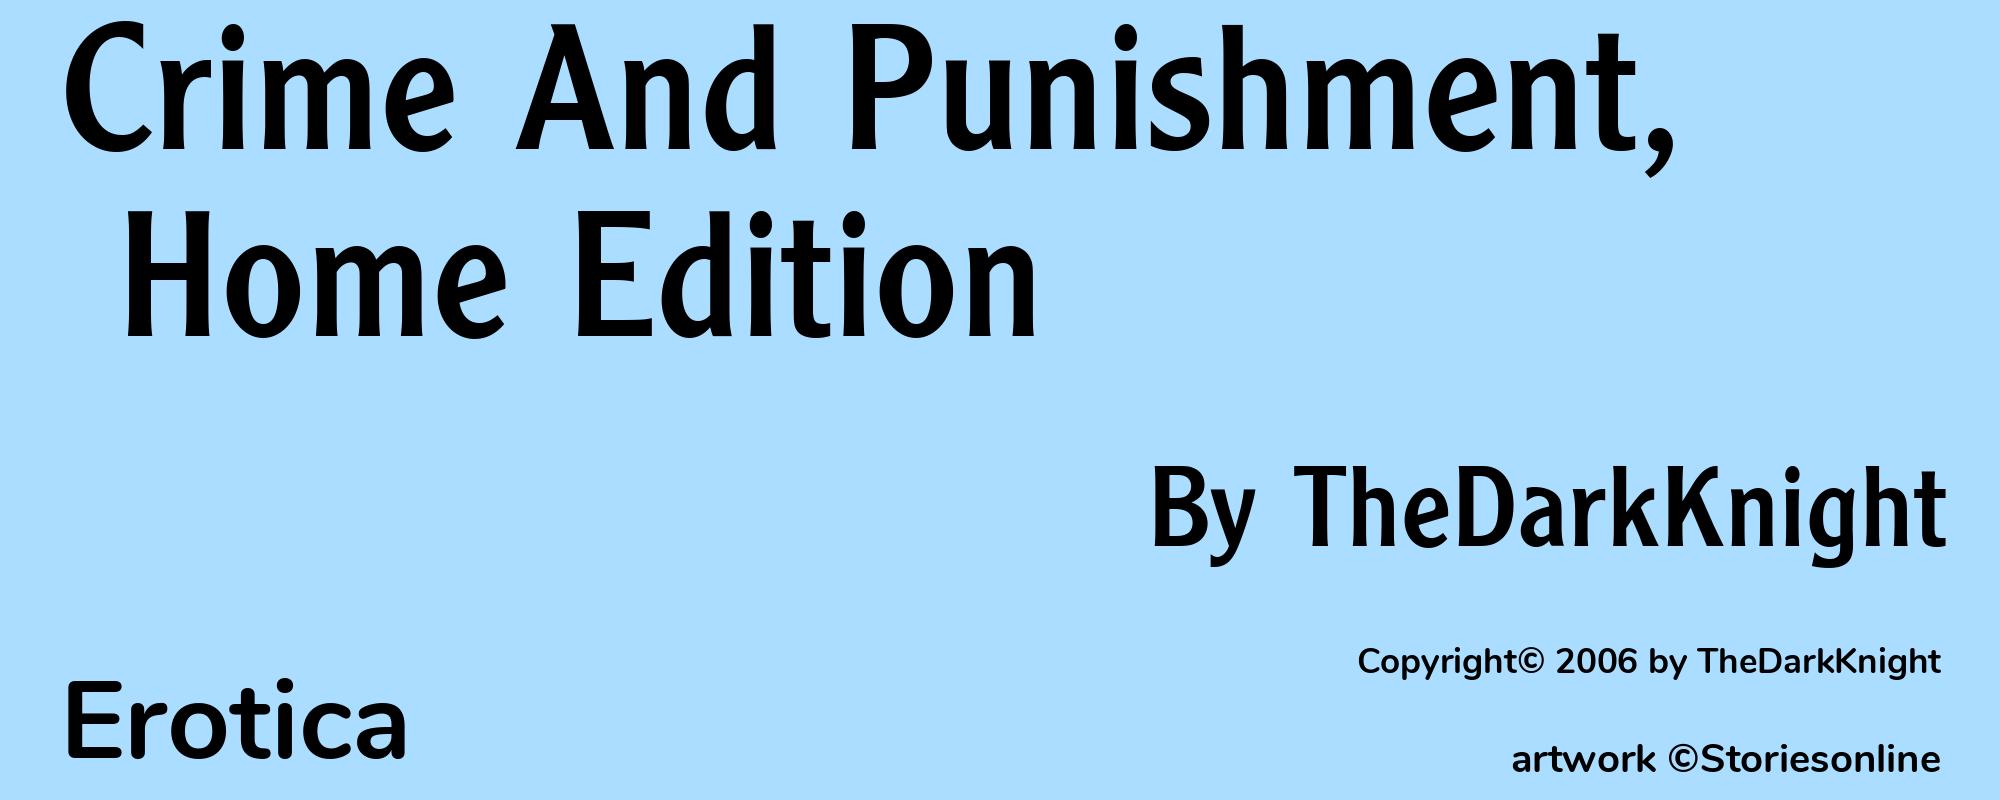 Crime And Punishment, Home Edition - Cover